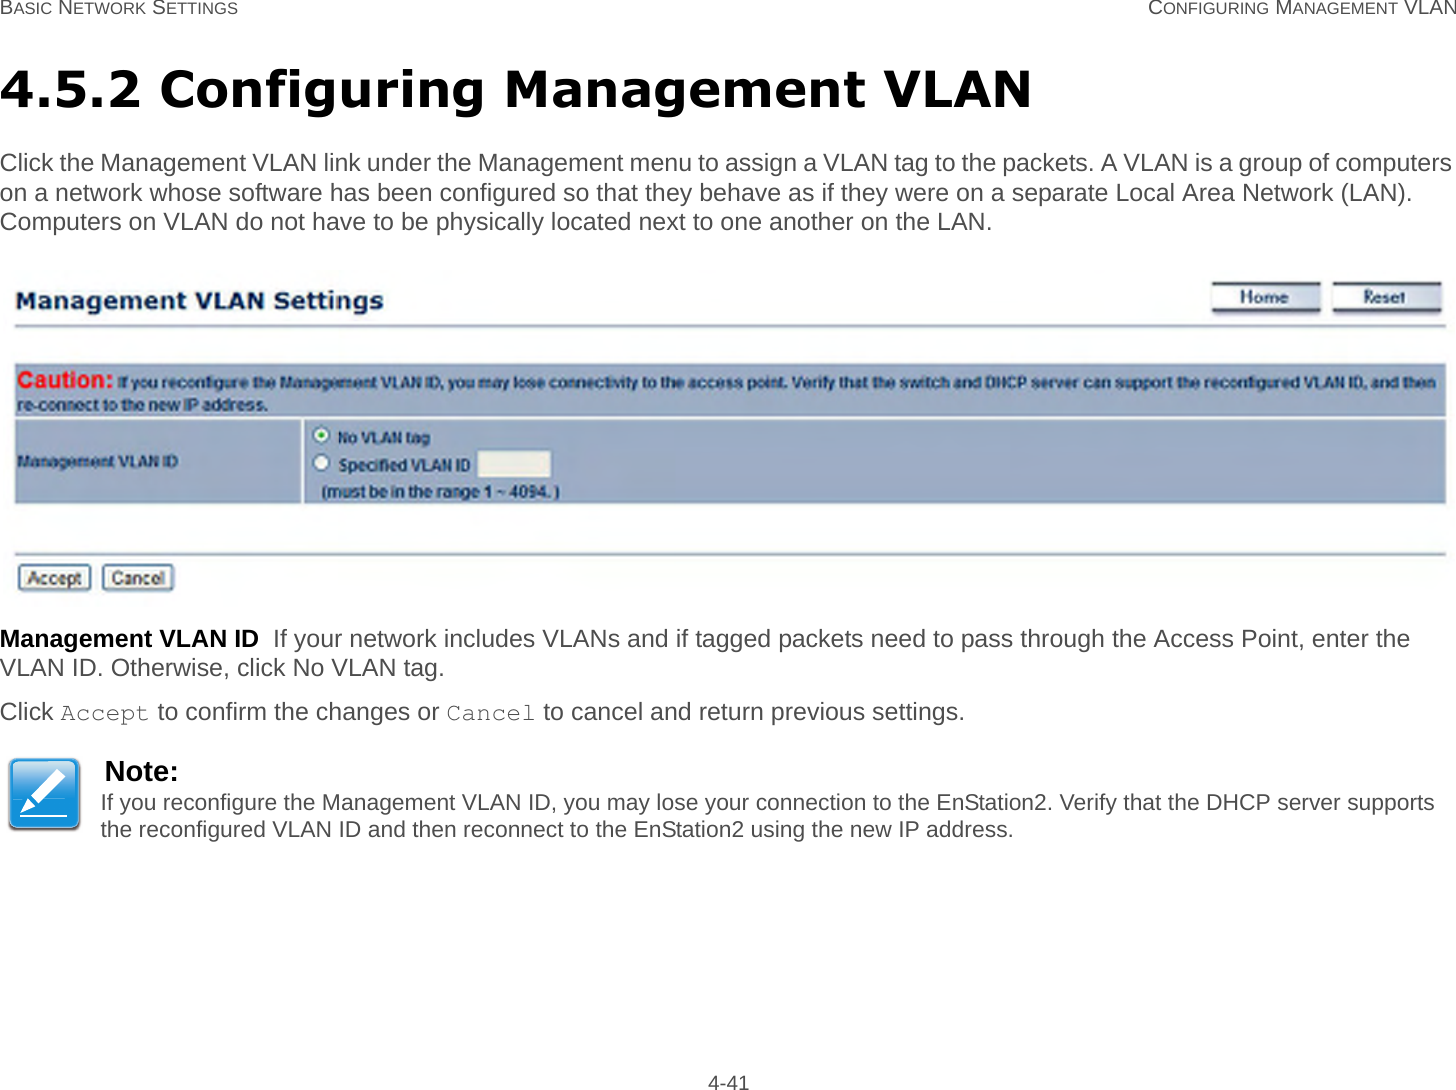 BASIC NETWORK SETTINGS CONFIGURING MANAGEMENT VLAN 4-414.5.2 Configuring Management VLANClick the Management VLAN link under the Management menu to assign a VLAN tag to the packets. A VLAN is a group of computers on a network whose software has been configured so that they behave as if they were on a separate Local Area Network (LAN). Computers on VLAN do not have to be physically located next to one another on the LAN.Management VLAN ID  If your network includes VLANs and if tagged packets need to pass through the Access Point, enter the VLAN ID. Otherwise, click No VLAN tag.Click Accept to confirm the changes or Cancel to cancel and return previous settings.Note:If you reconfigure the Management VLAN ID, you may lose your connection to the EnStation2. Verify that the DHCP server supports the reconfigured VLAN ID and then reconnect to the EnStation2 using the new IP address.